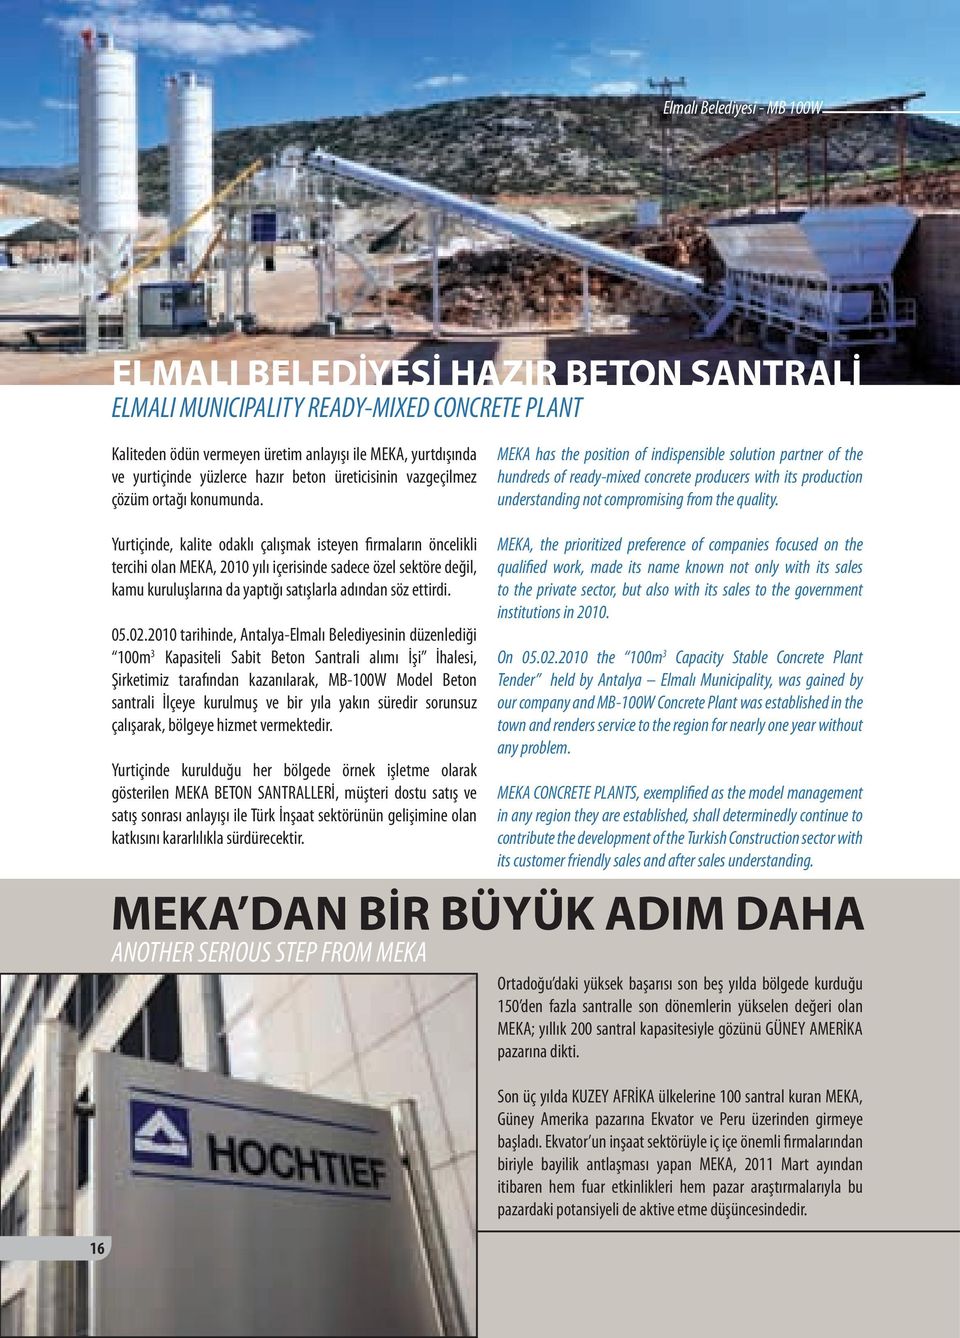 MEKA has the position of indispensible solution partner of the hundreds of ready-mixed concrete producers with its production understanding not compromising from the quality.